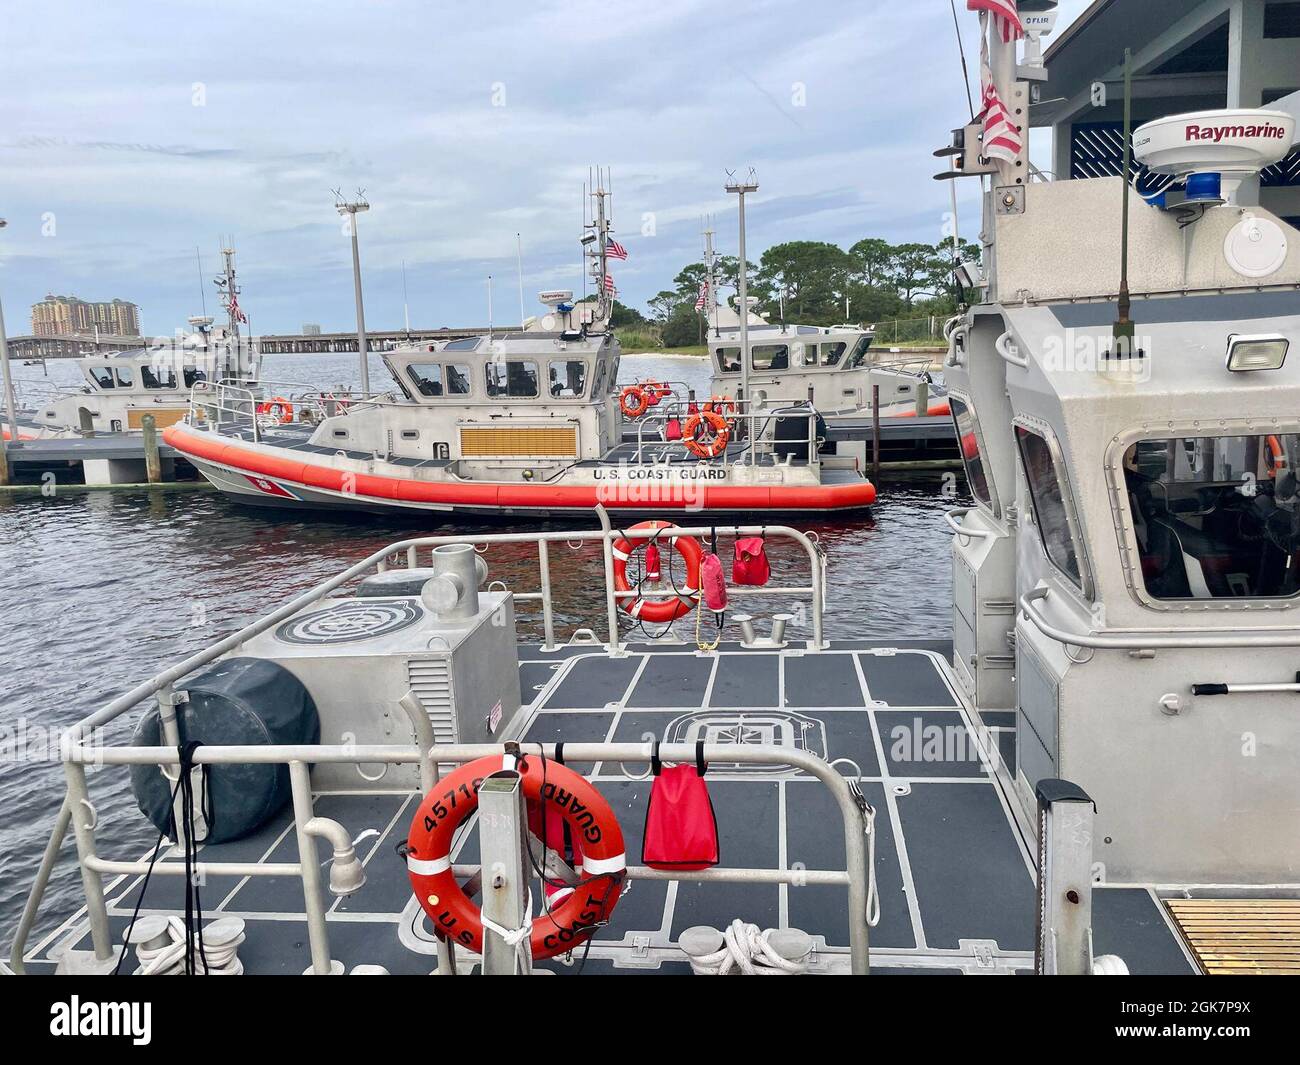 Crews stand by at U.S. Coast Guard Station Gulfport in Mississippi Aug. 28, 2021, ahead of significant regional weather. U.S. Coast Guard crews and assets are taking steps to prepare for Hurricane Ida. Stock Photo